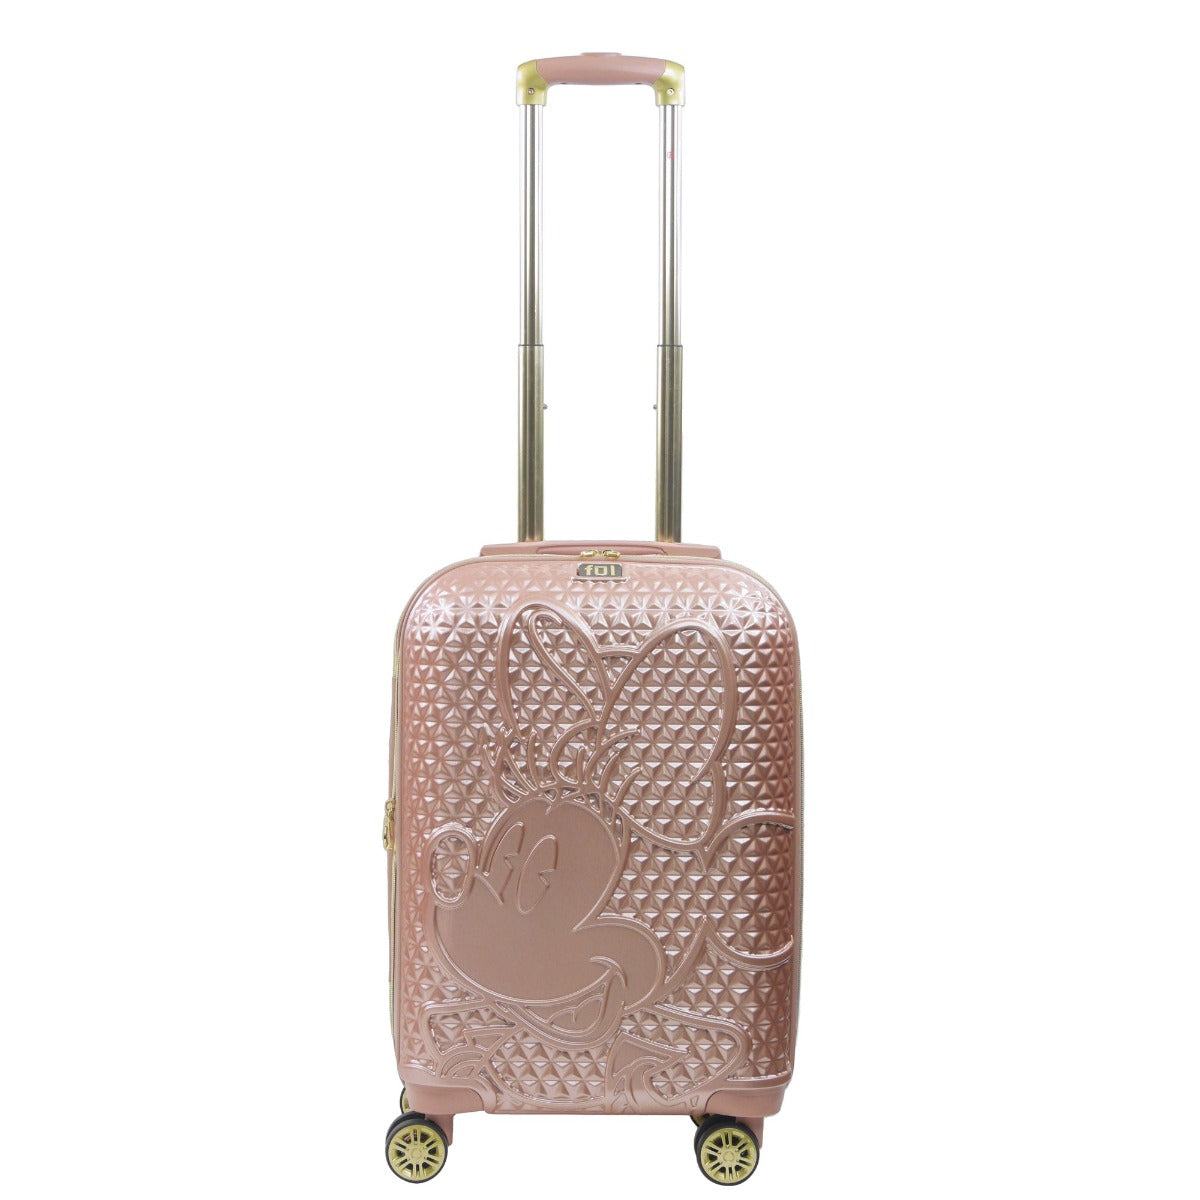 Ful Disney Minnie Mouse 22.5 inch suitcase spinner rose gold - best hardshell carry on luggage for traveling